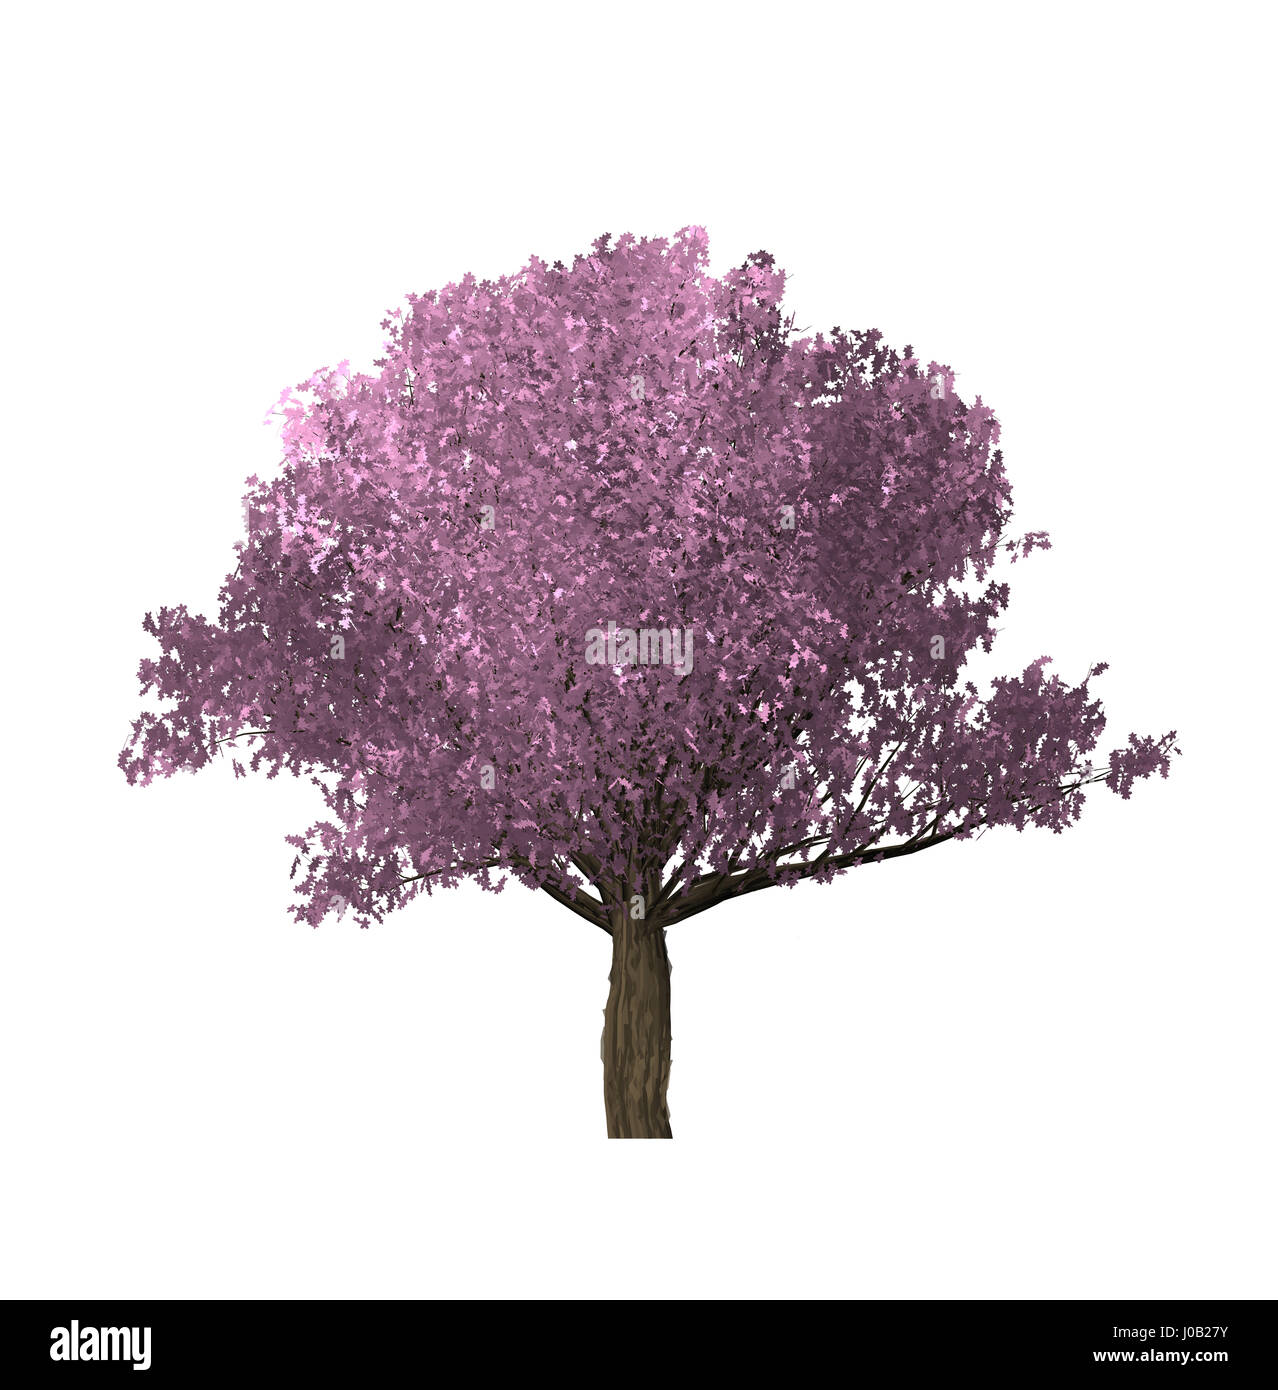 Pink Tree of computer graphics in create isolated on white background. Stock Photo